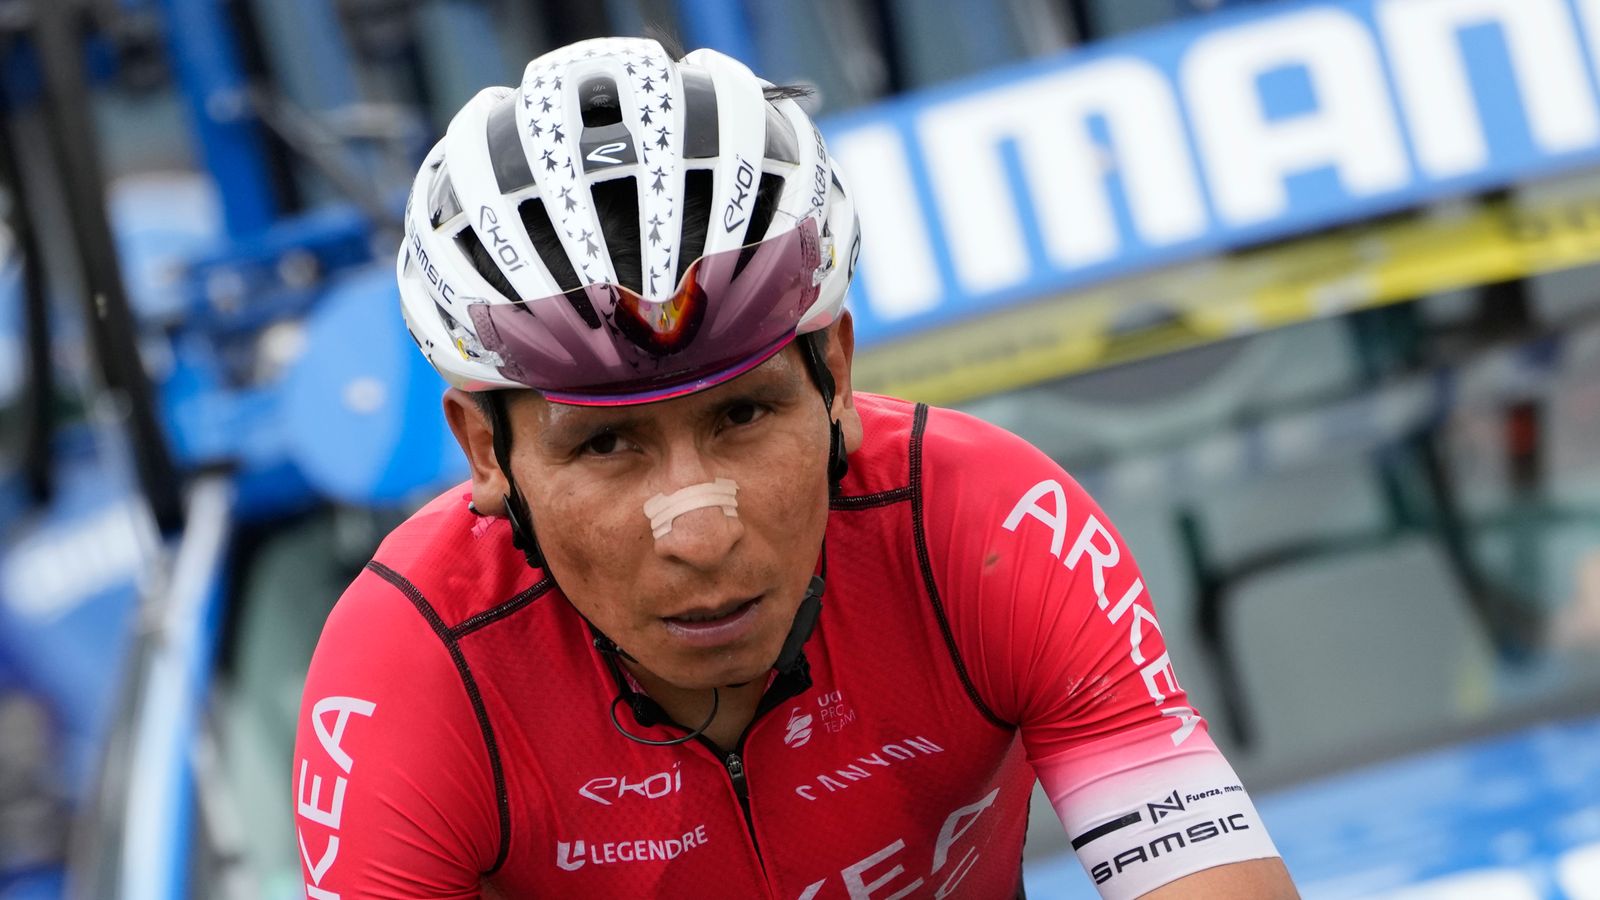 Tour de France: Nairo Quintana disqualified after tramadol found in blood samples